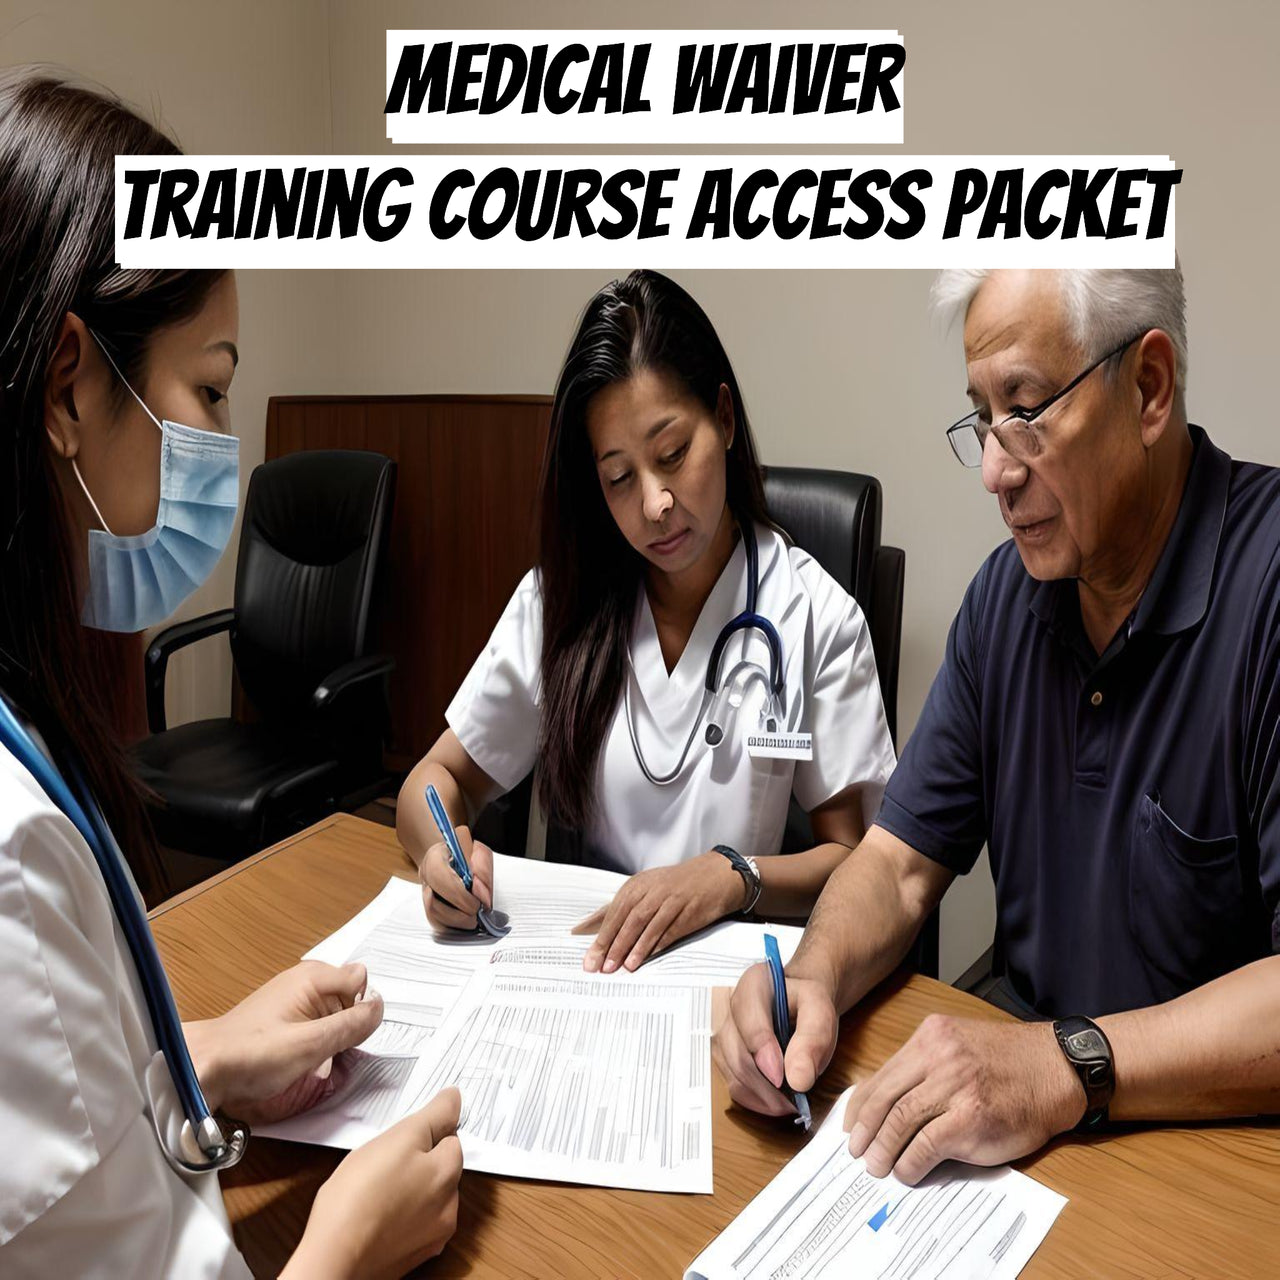 Medical Waiver Training Course Access Packet